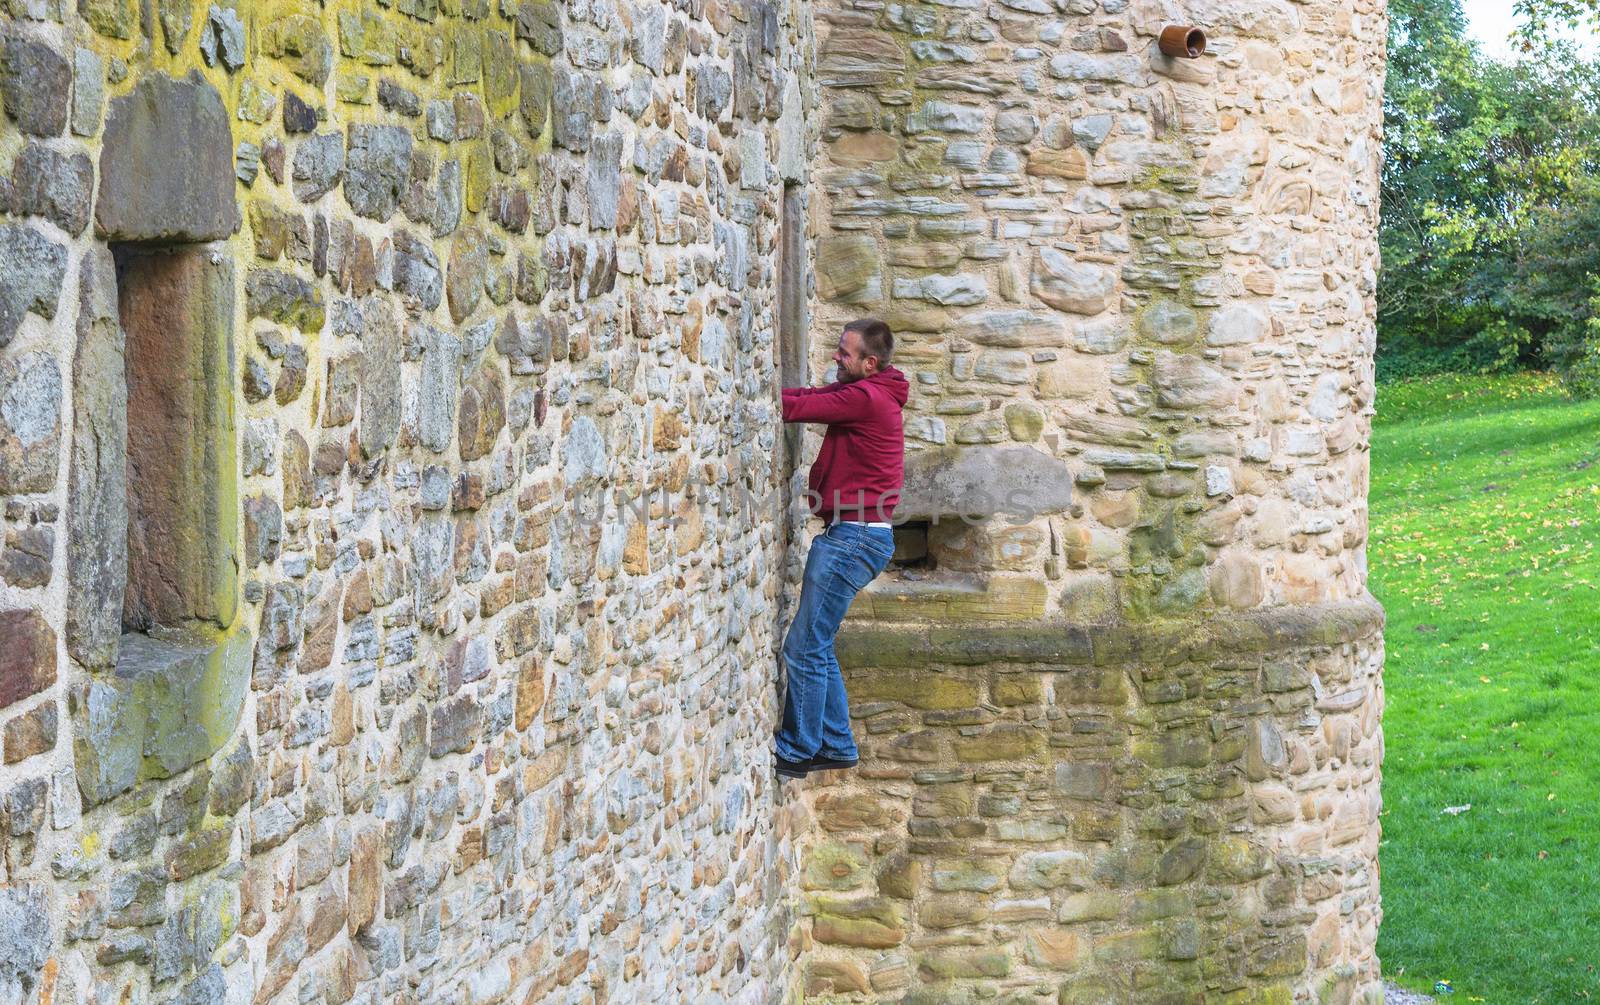 Young Adult Man climbs up a castle wall.